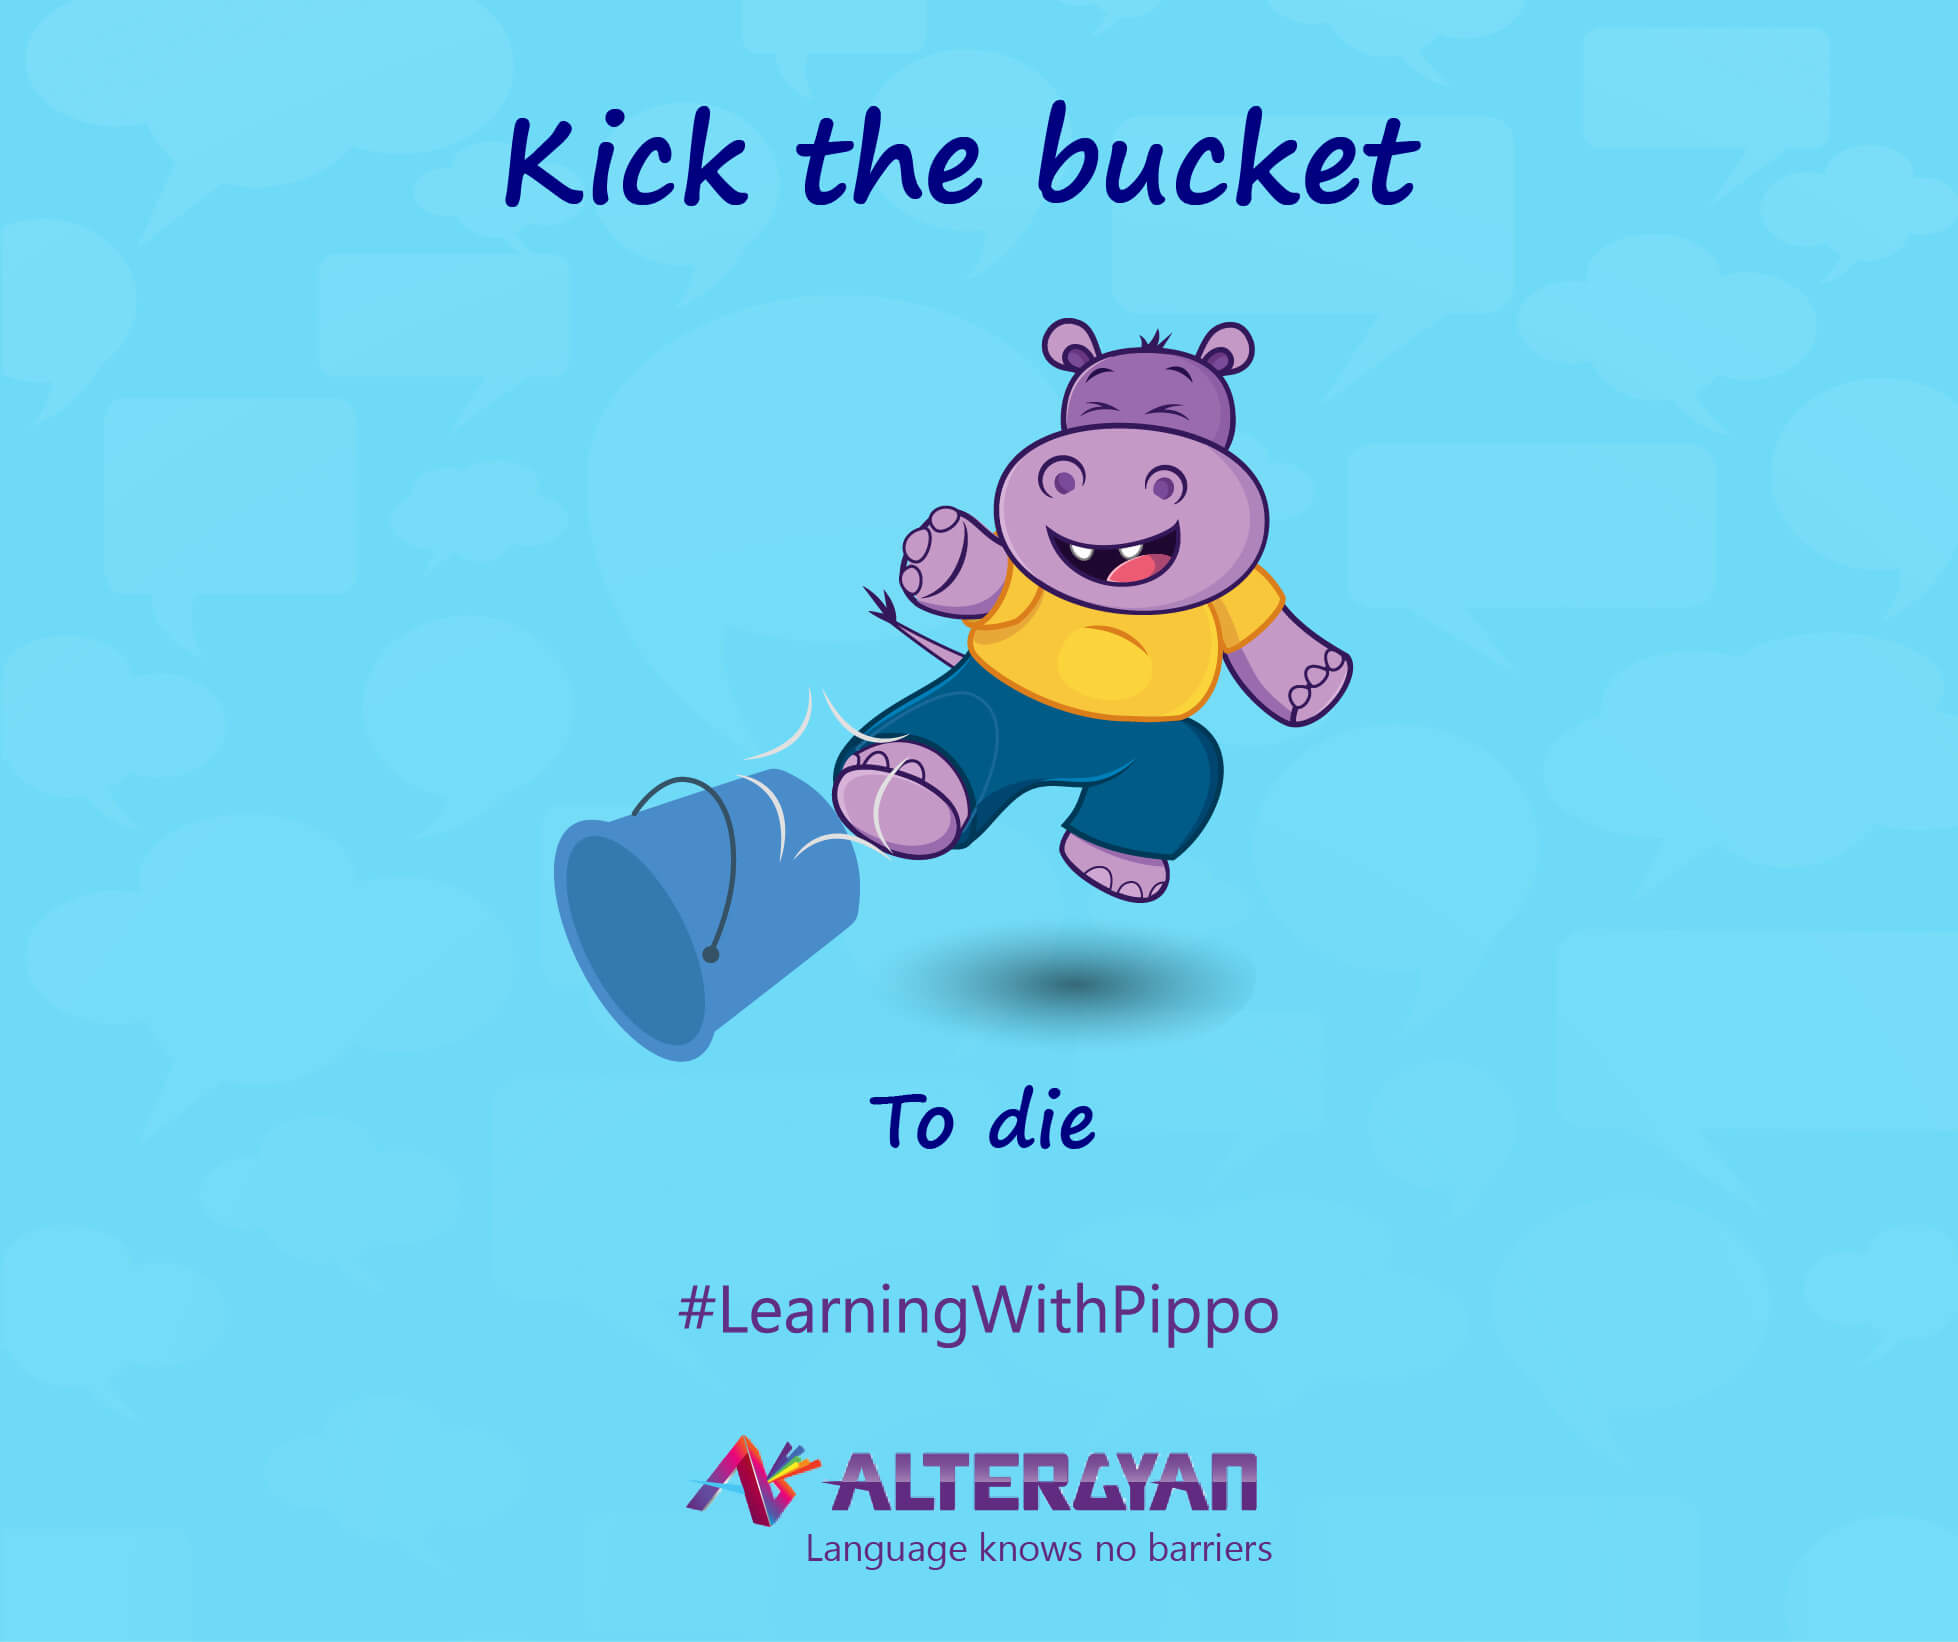 English Idiom Kick the bucket Meaning with Sentences